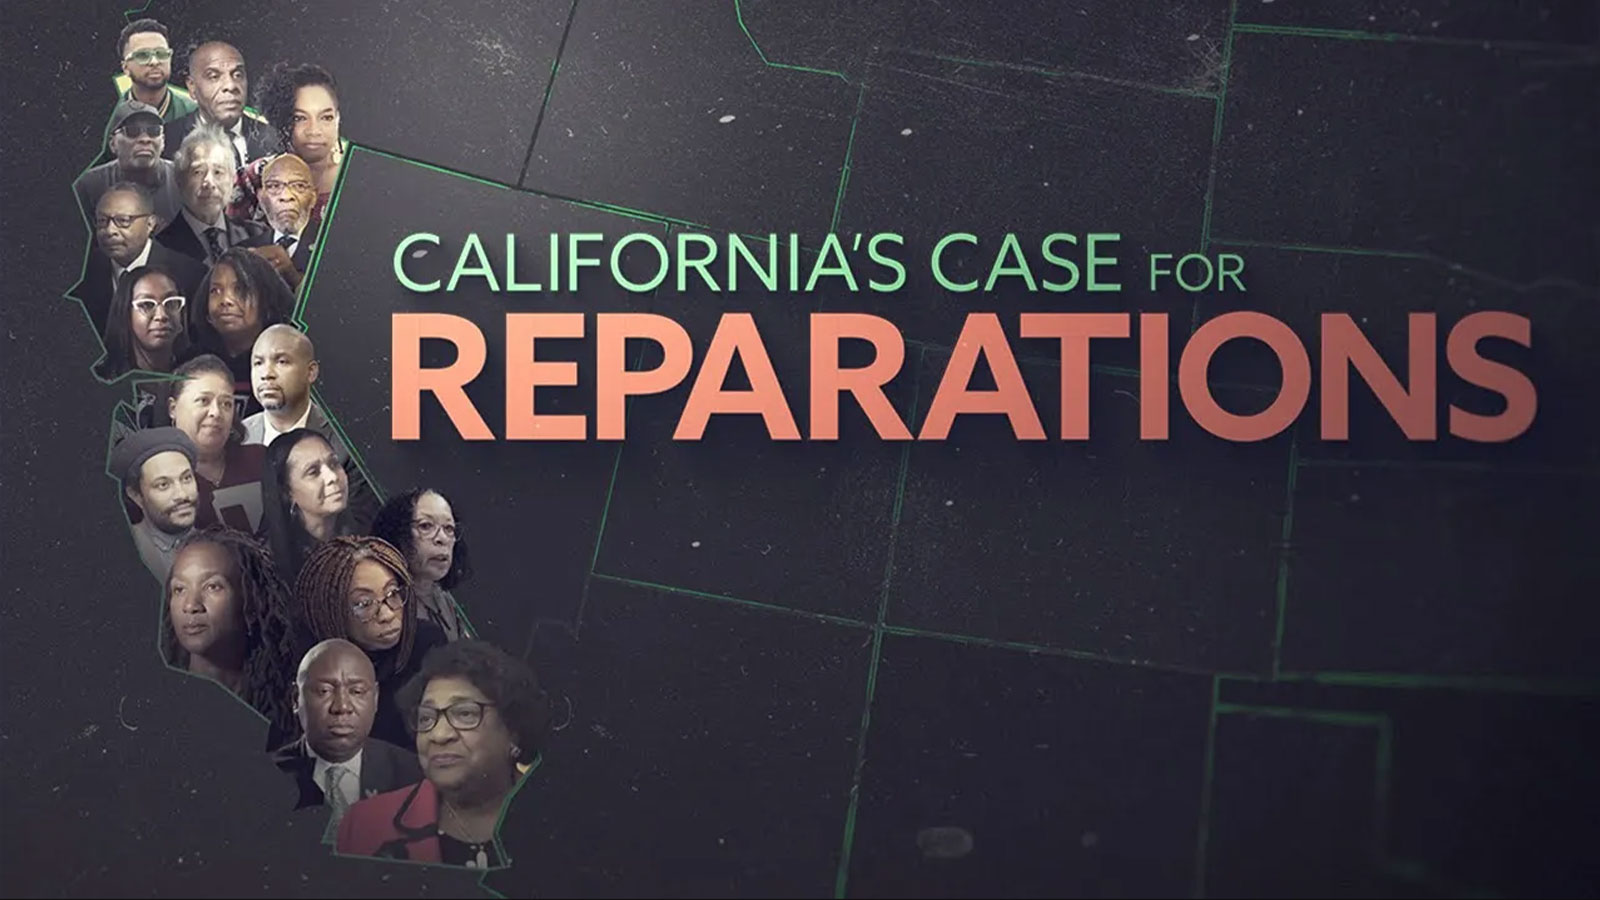 California’s Case for Reparations: ‘We are history in the making’